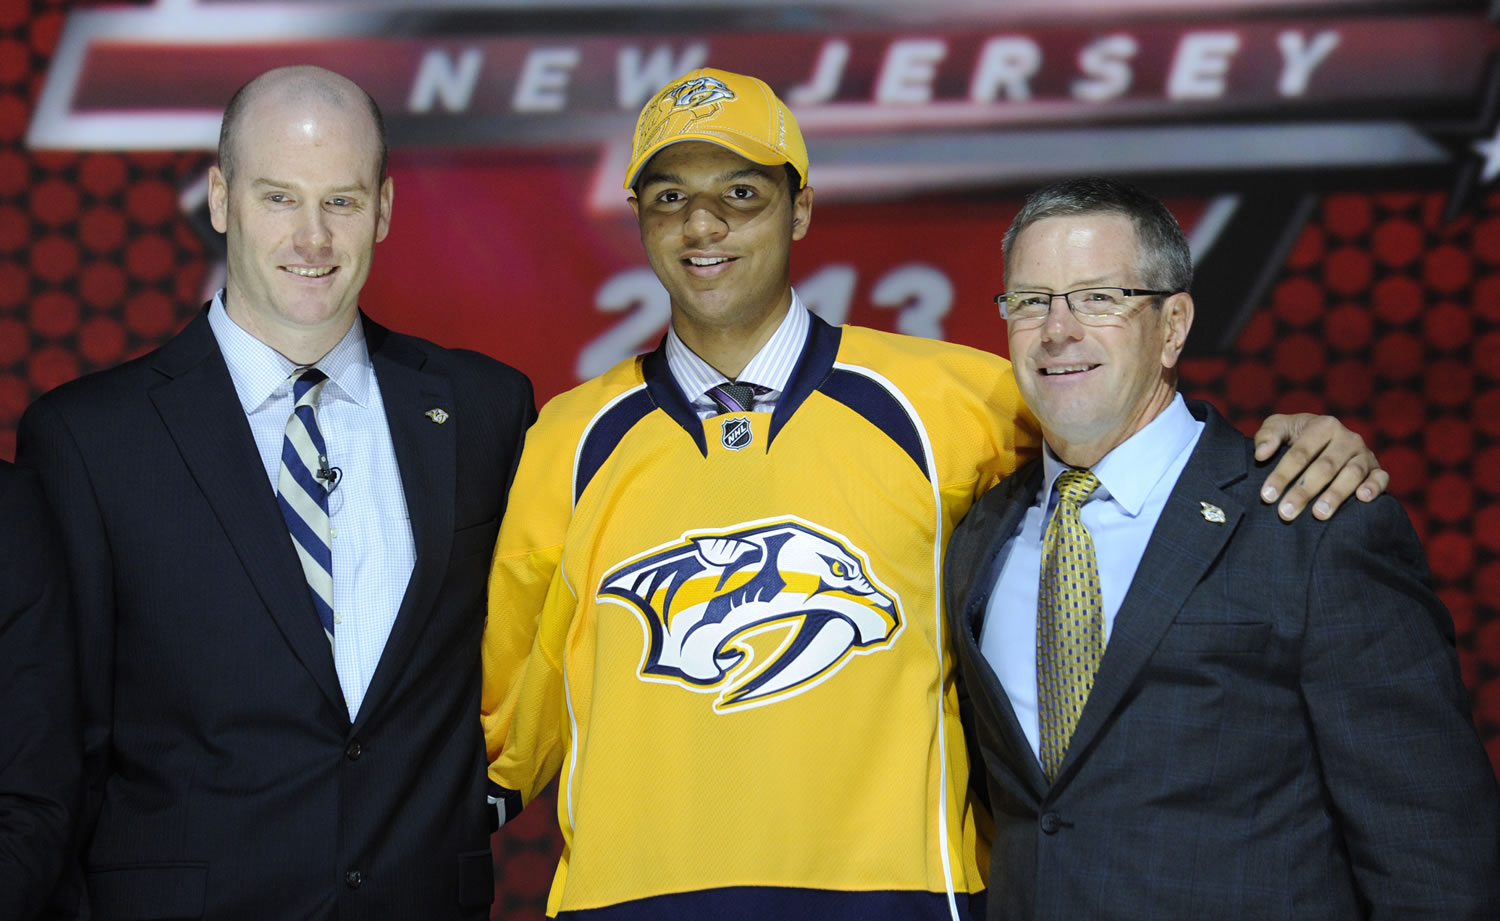 Portland Winterhawks Seth Jones stands with officials from the Nashville Predators after being chosen 4th overall in the first round of the NHL hockey draft on Sunday.